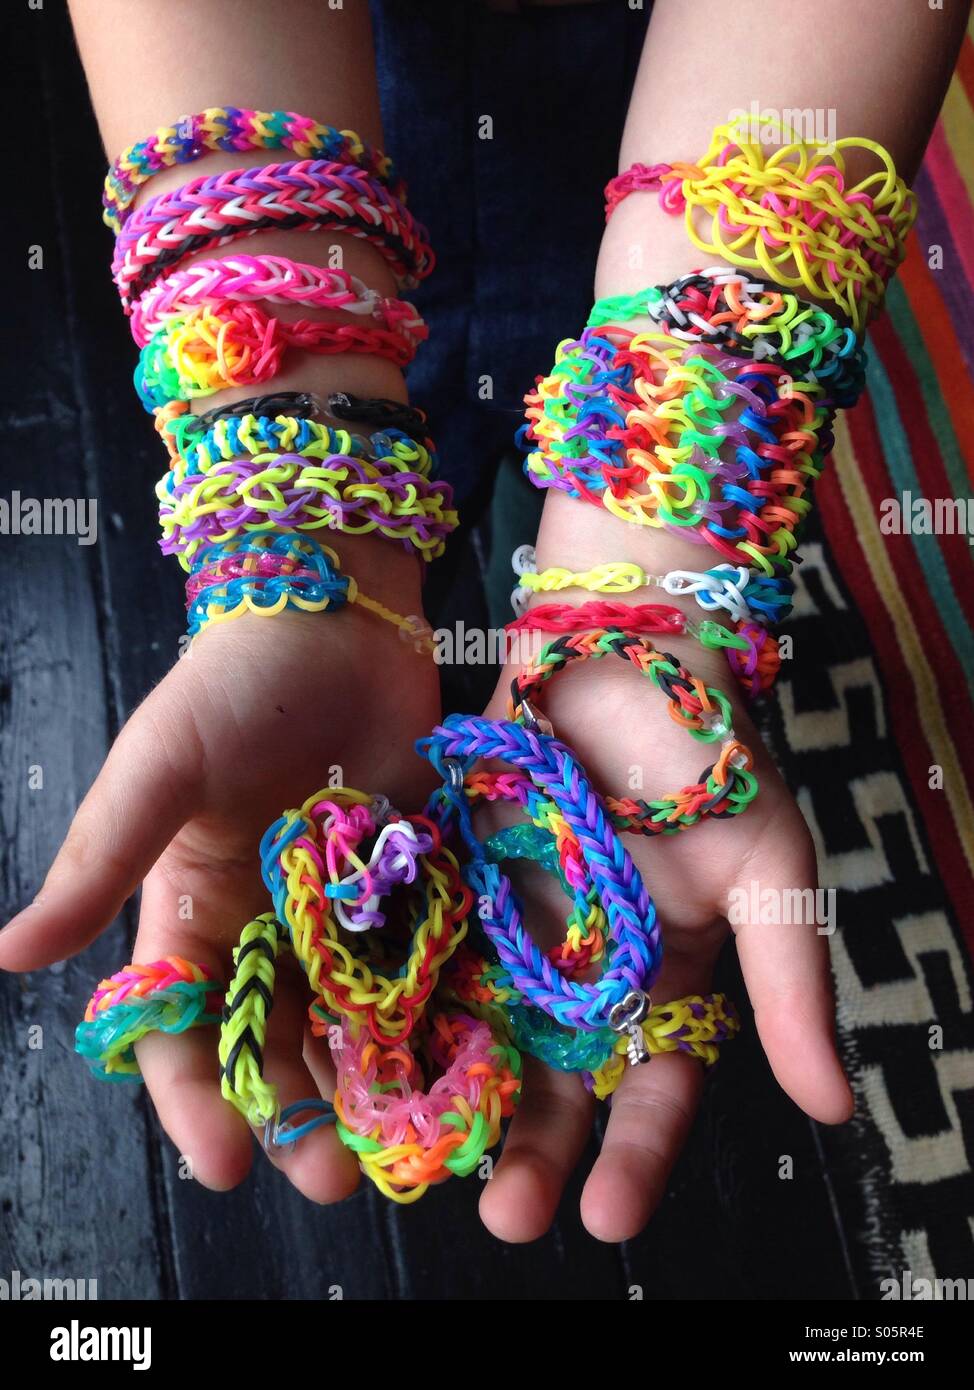 Loom bands - a young child's favourite past time Stock Photo